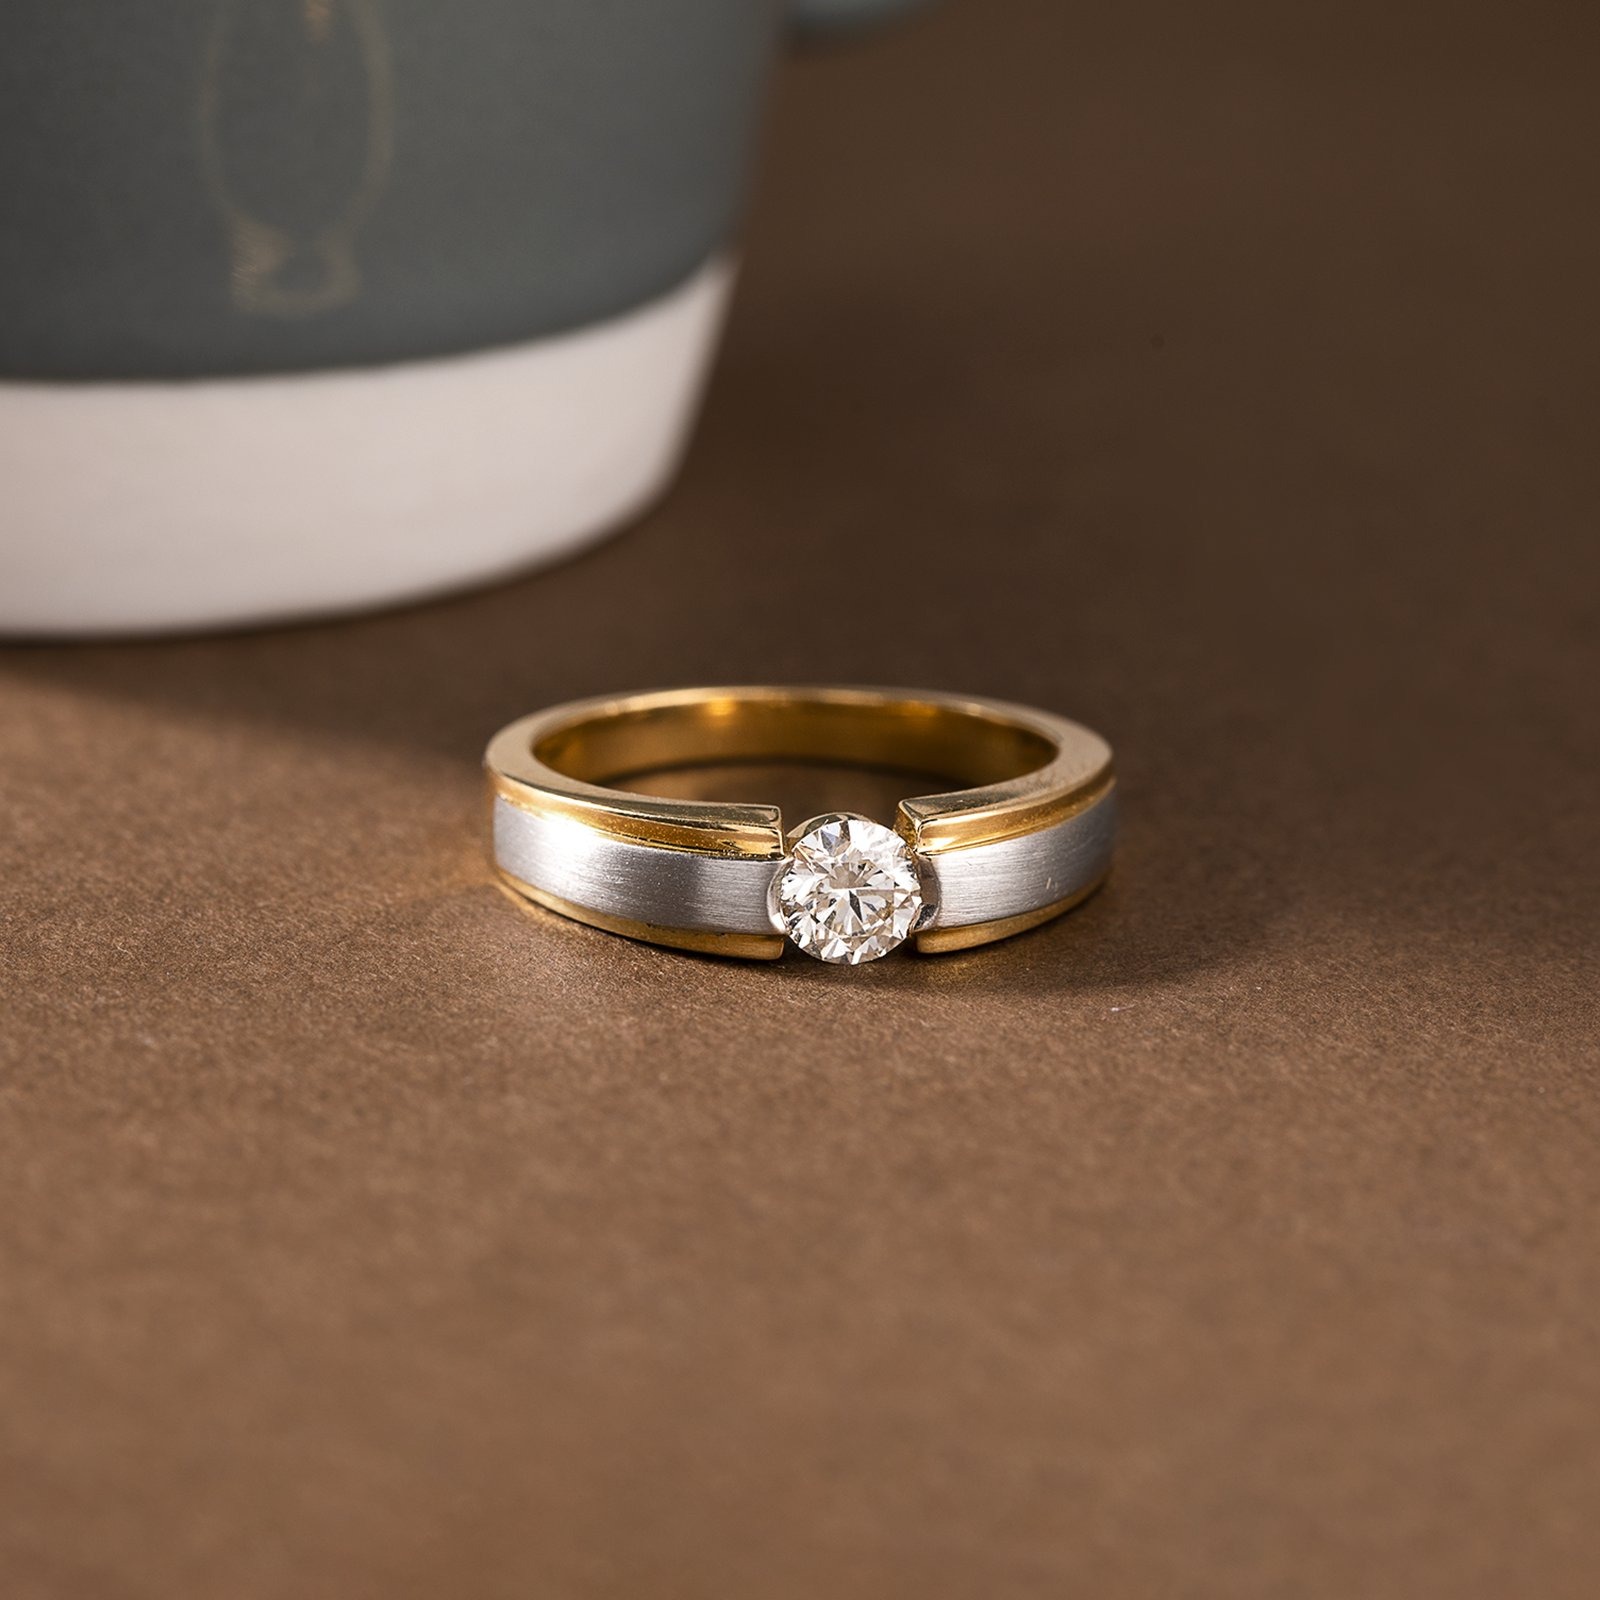 Cheers to your match... - CaratLane: A Tanishq Partnership | Facebook